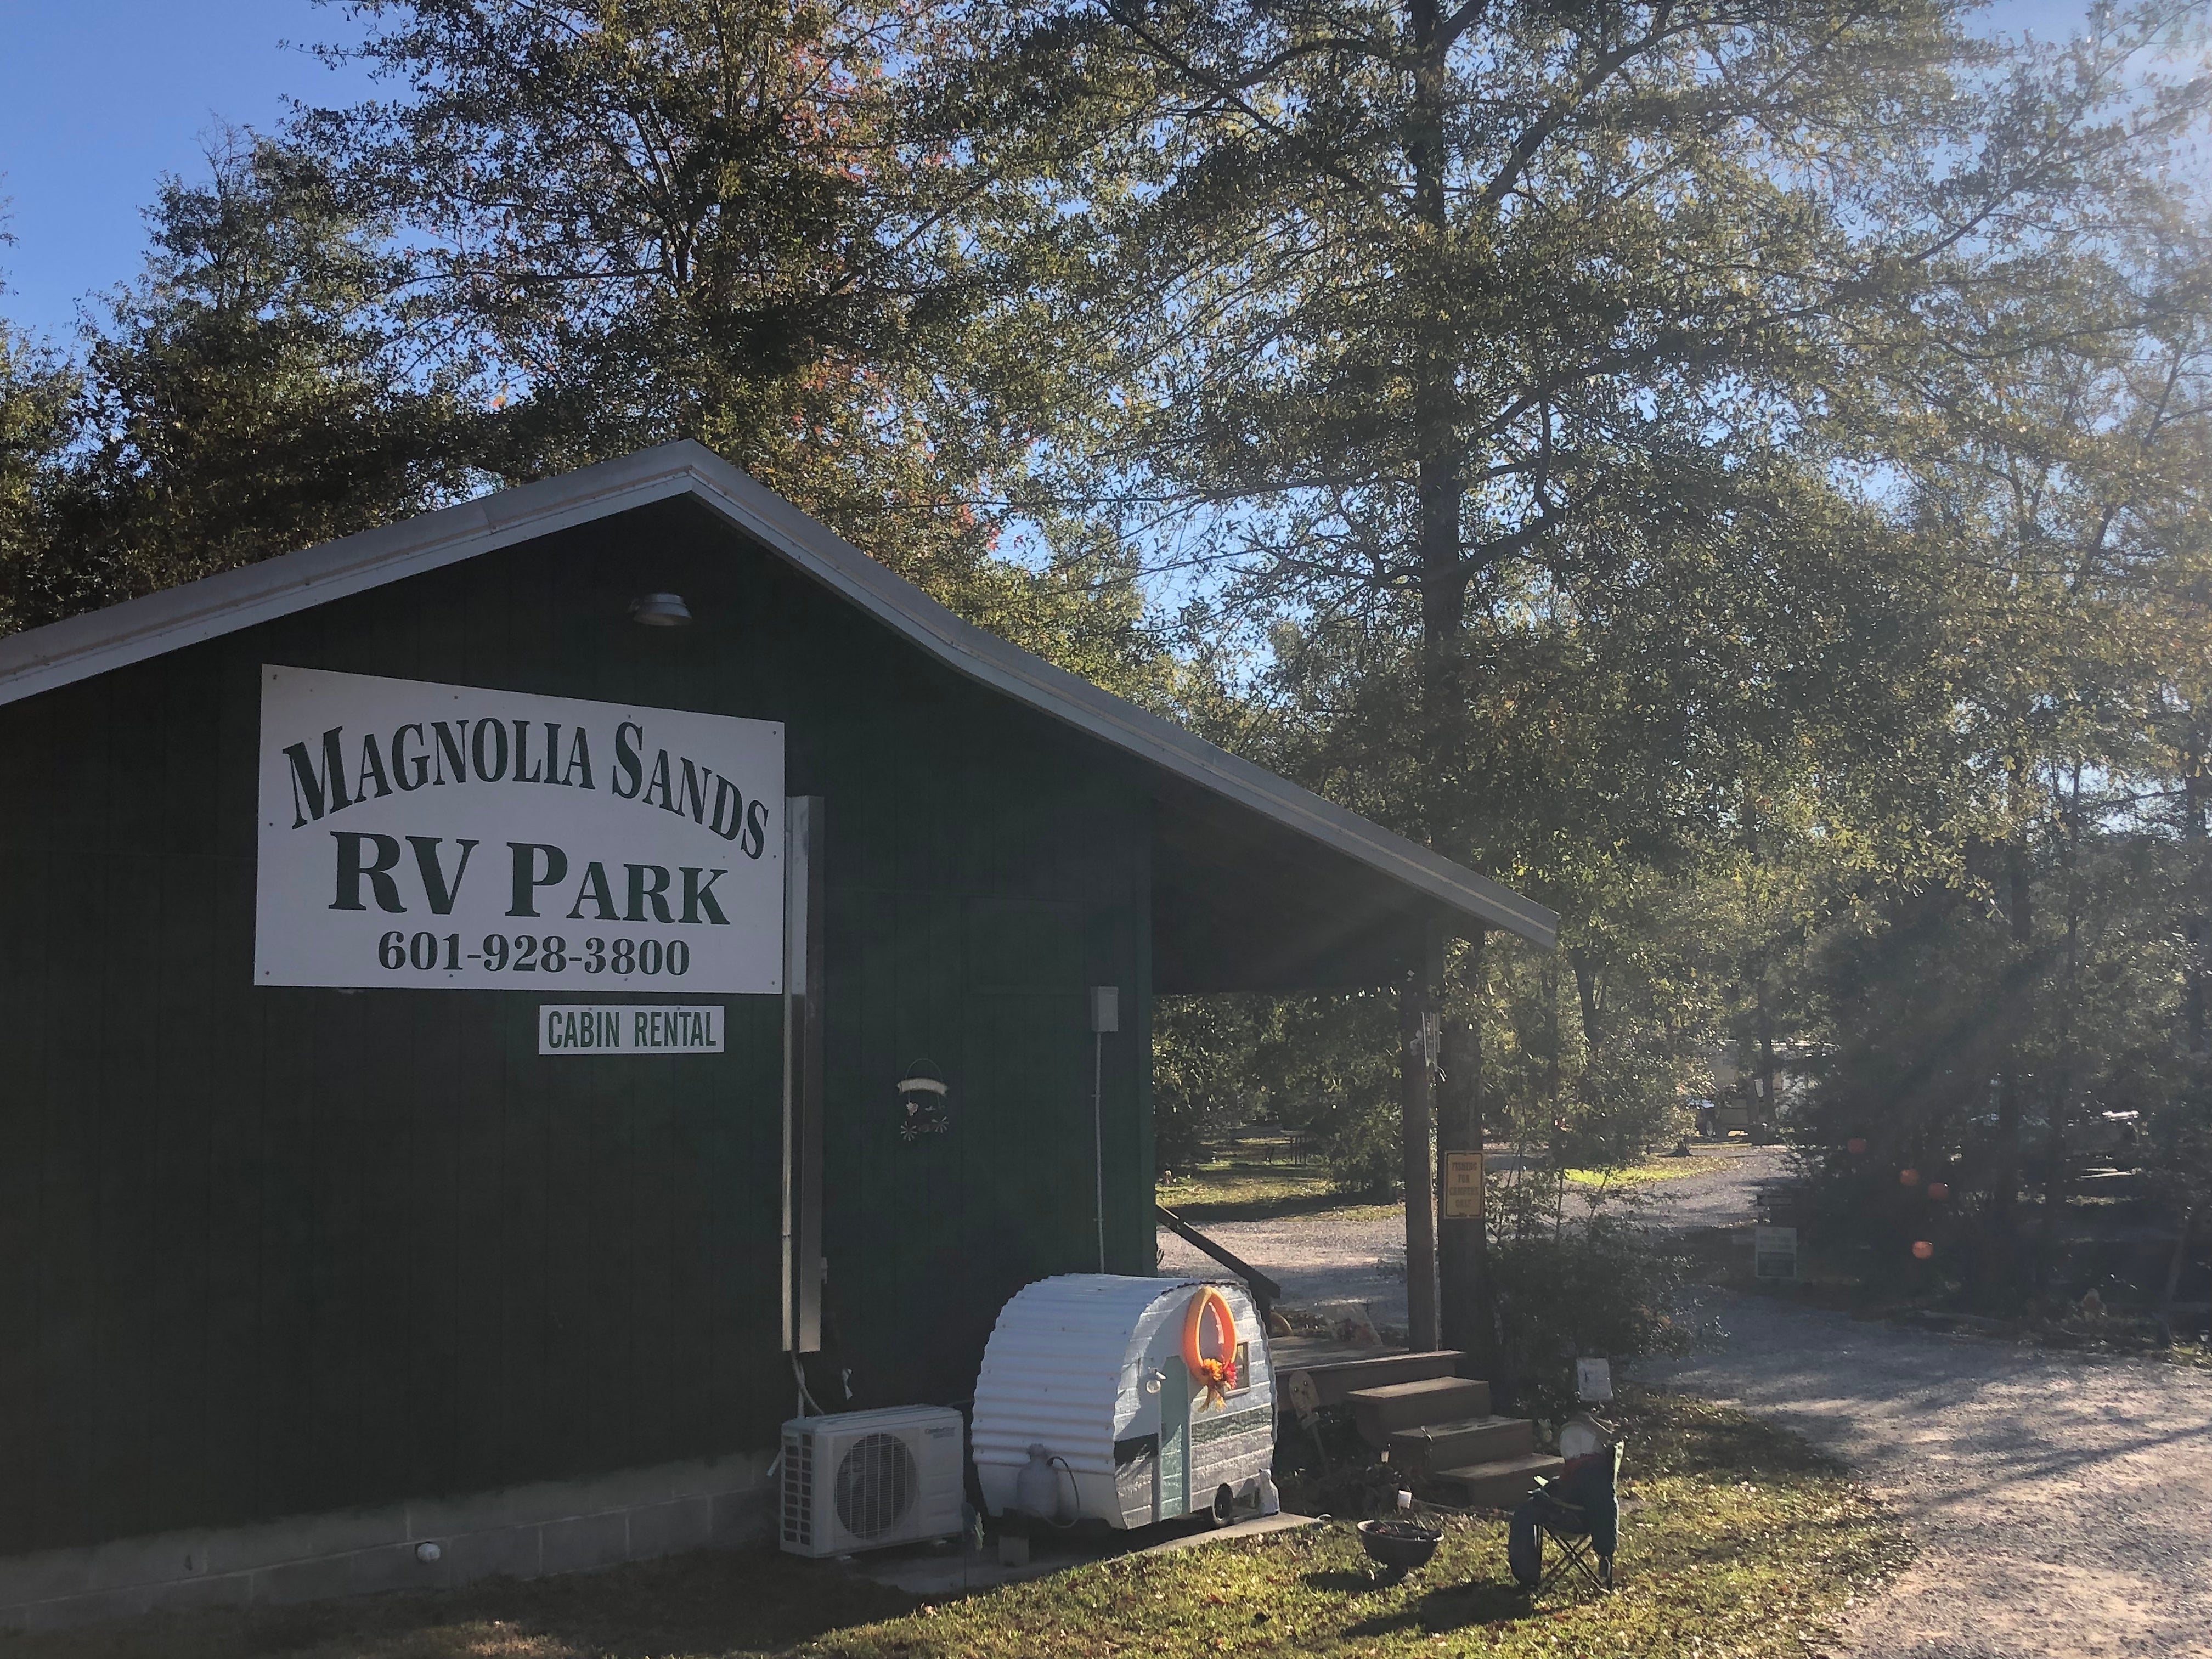 Camper submitted image from Magnolia Sands RV Park - 4